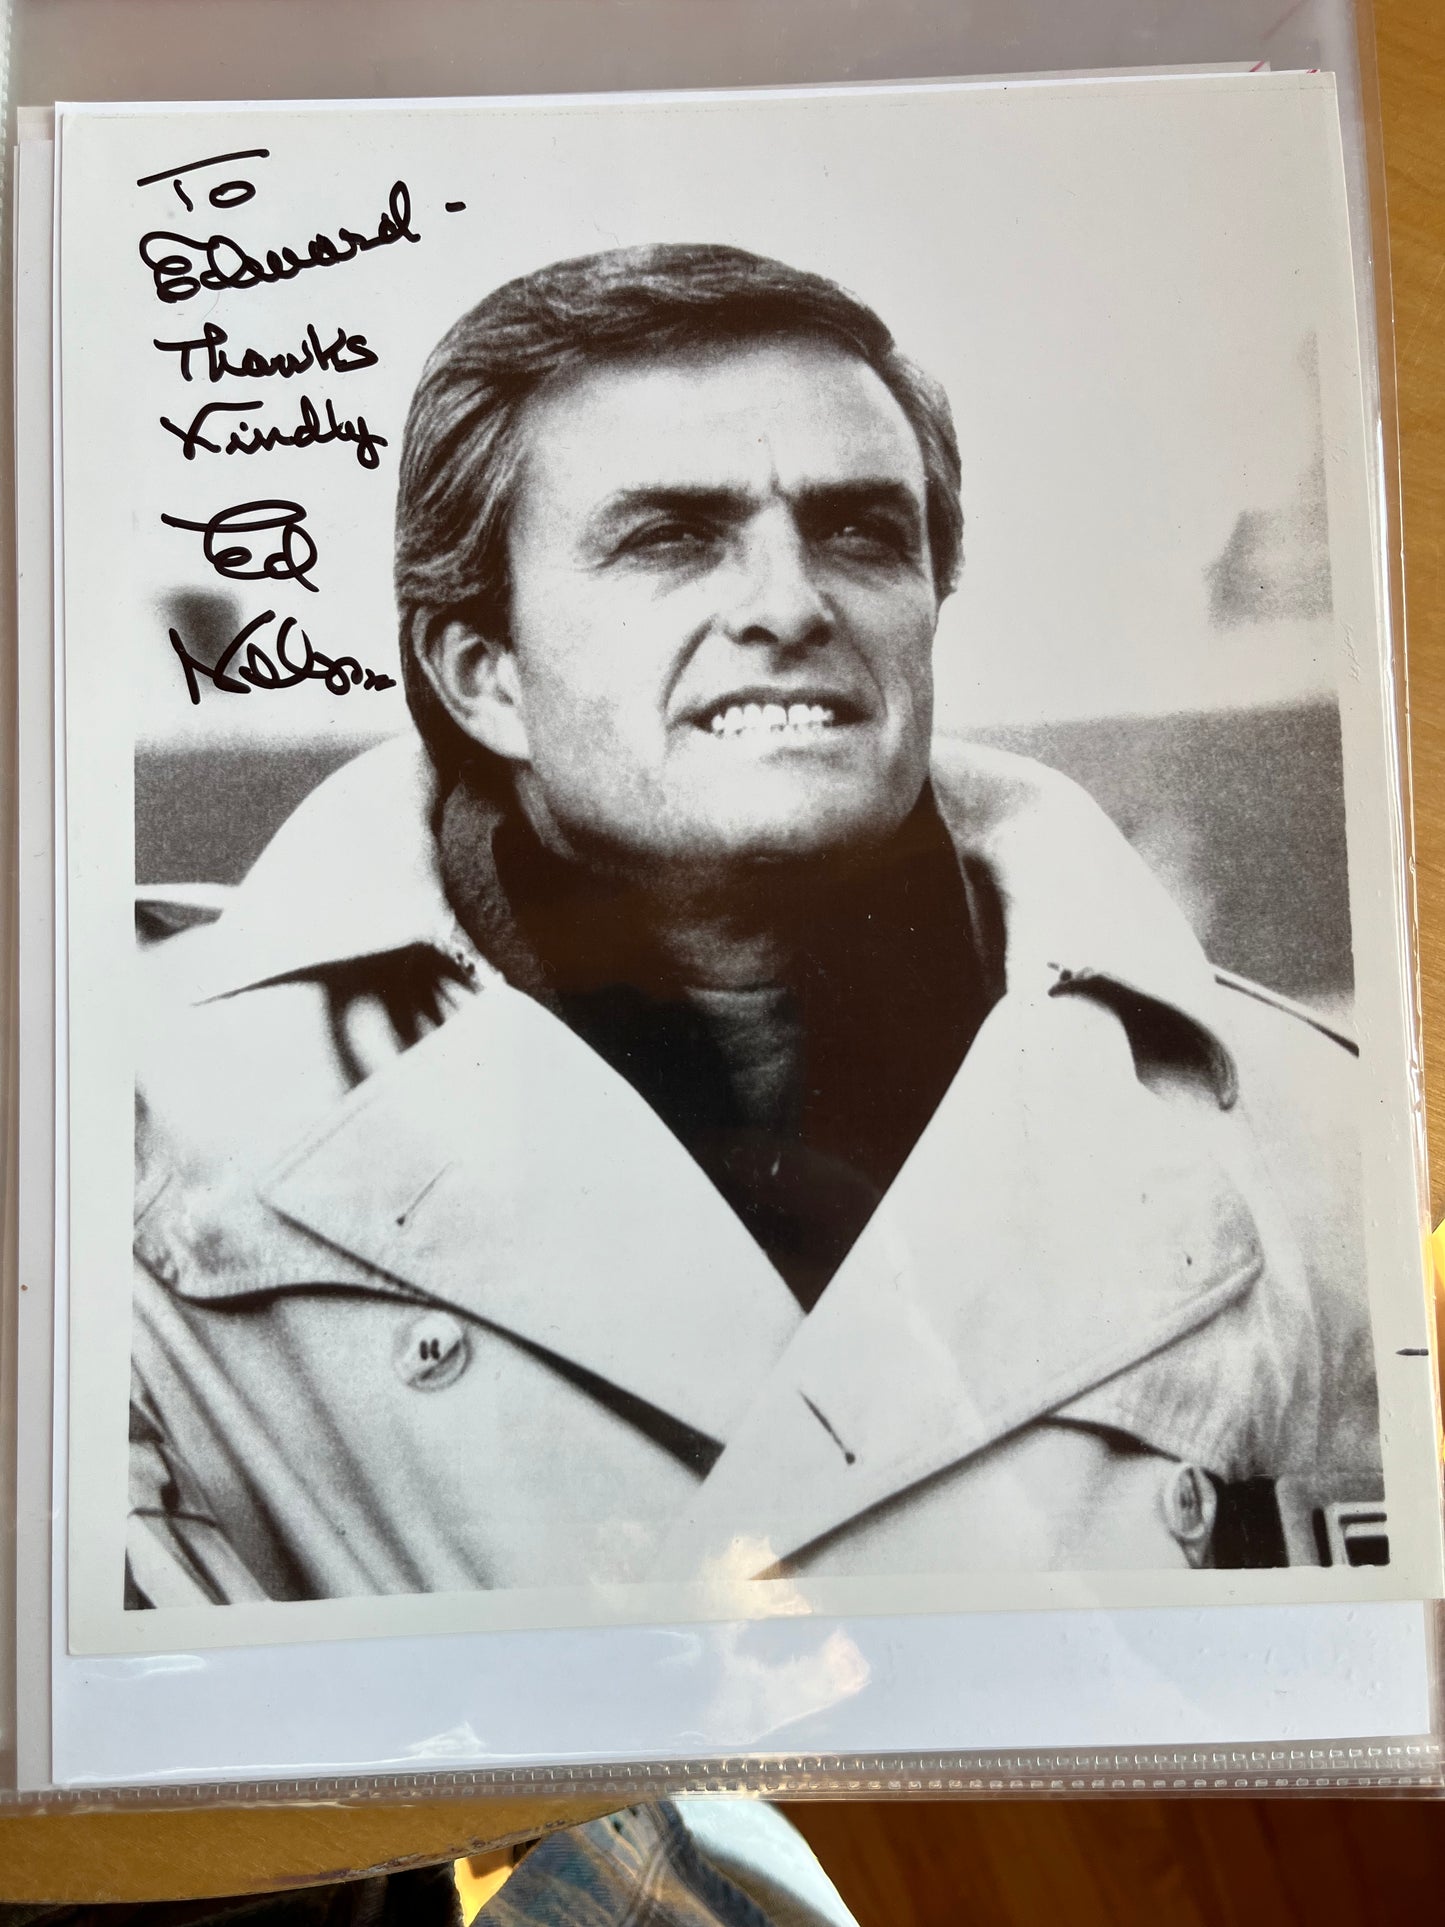 ED NELSON, star of PEYTON PLACE, actor, autograph